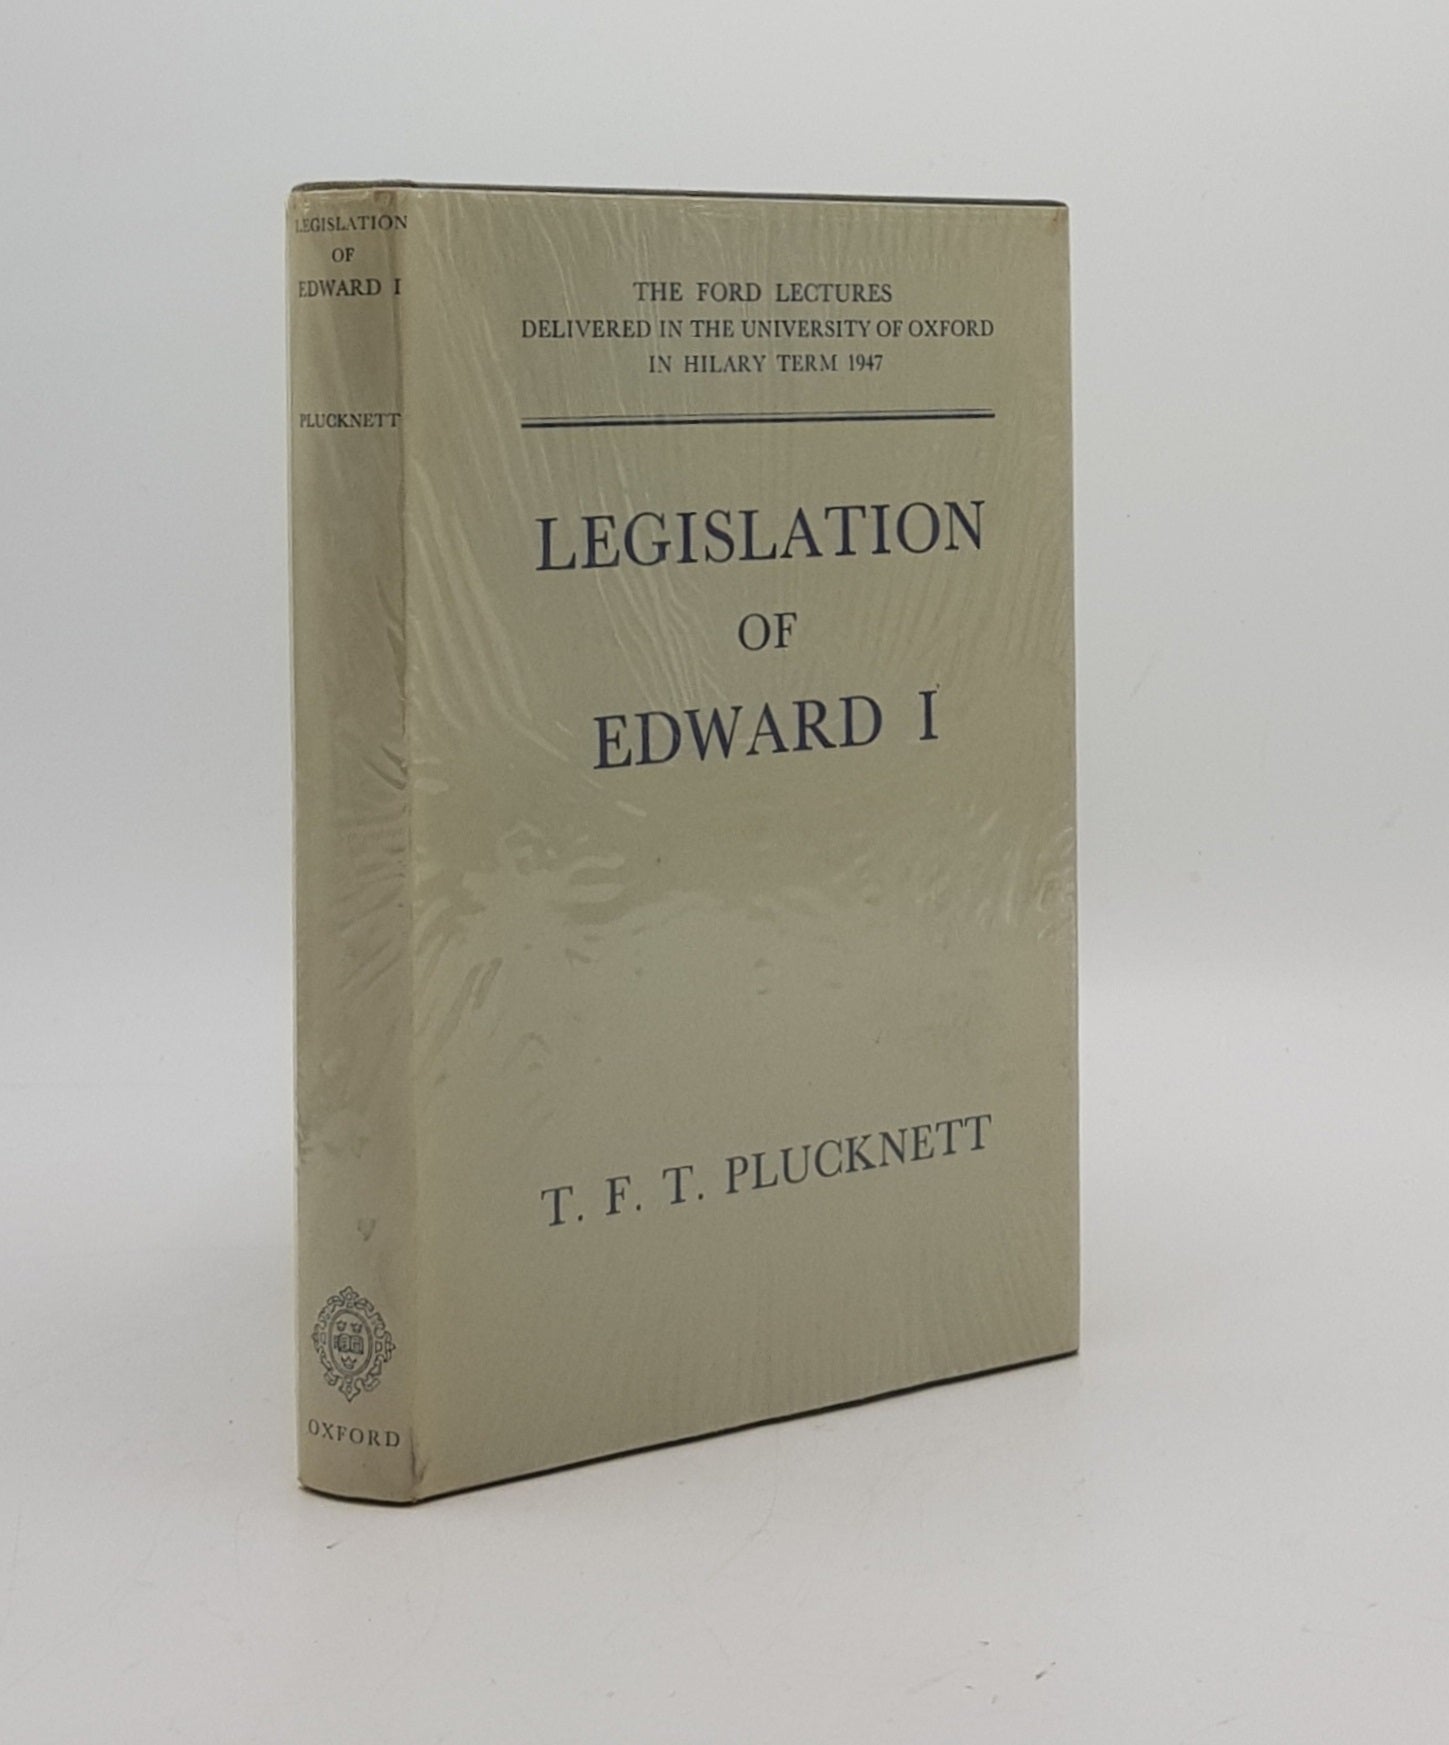 PLUCKNETT T.F.T. - Legislation of Edward I the Ford Lectures Delivered in the University of Oxford in Hilary Term 1947